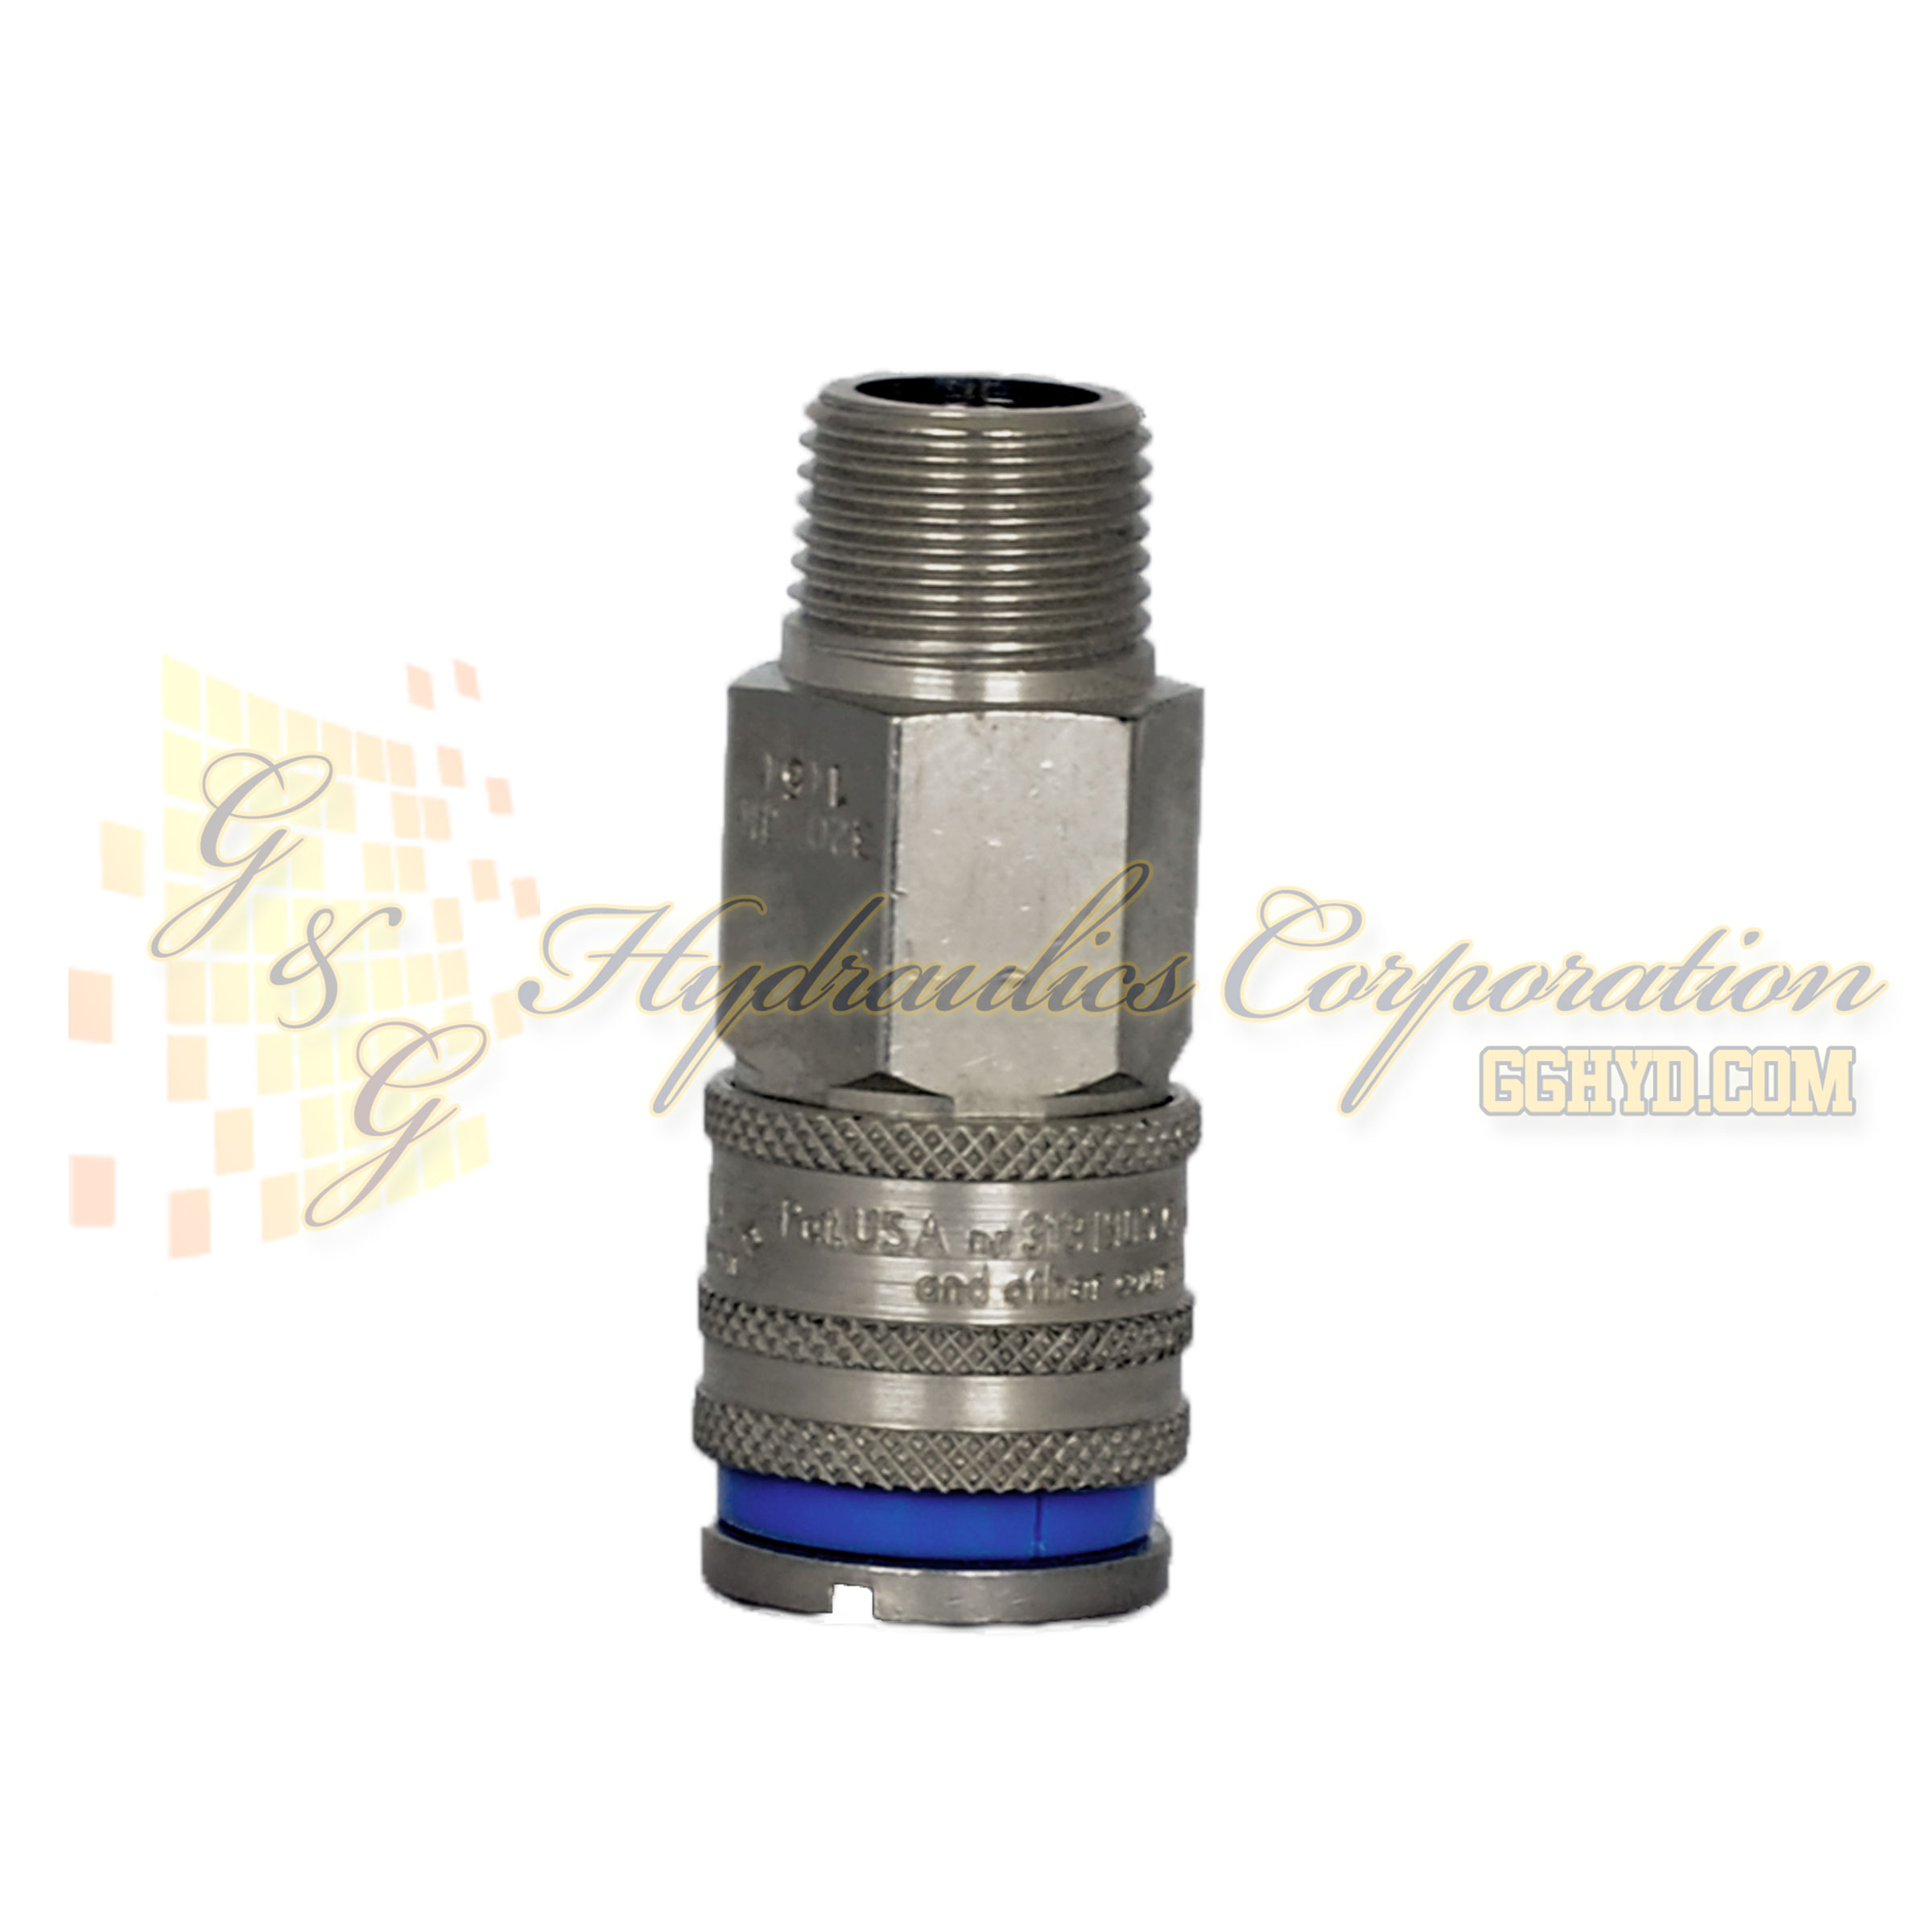 10-320-1454 CEJN Standard and Vented Safety Coupler, 3/8" NPT Male Threads